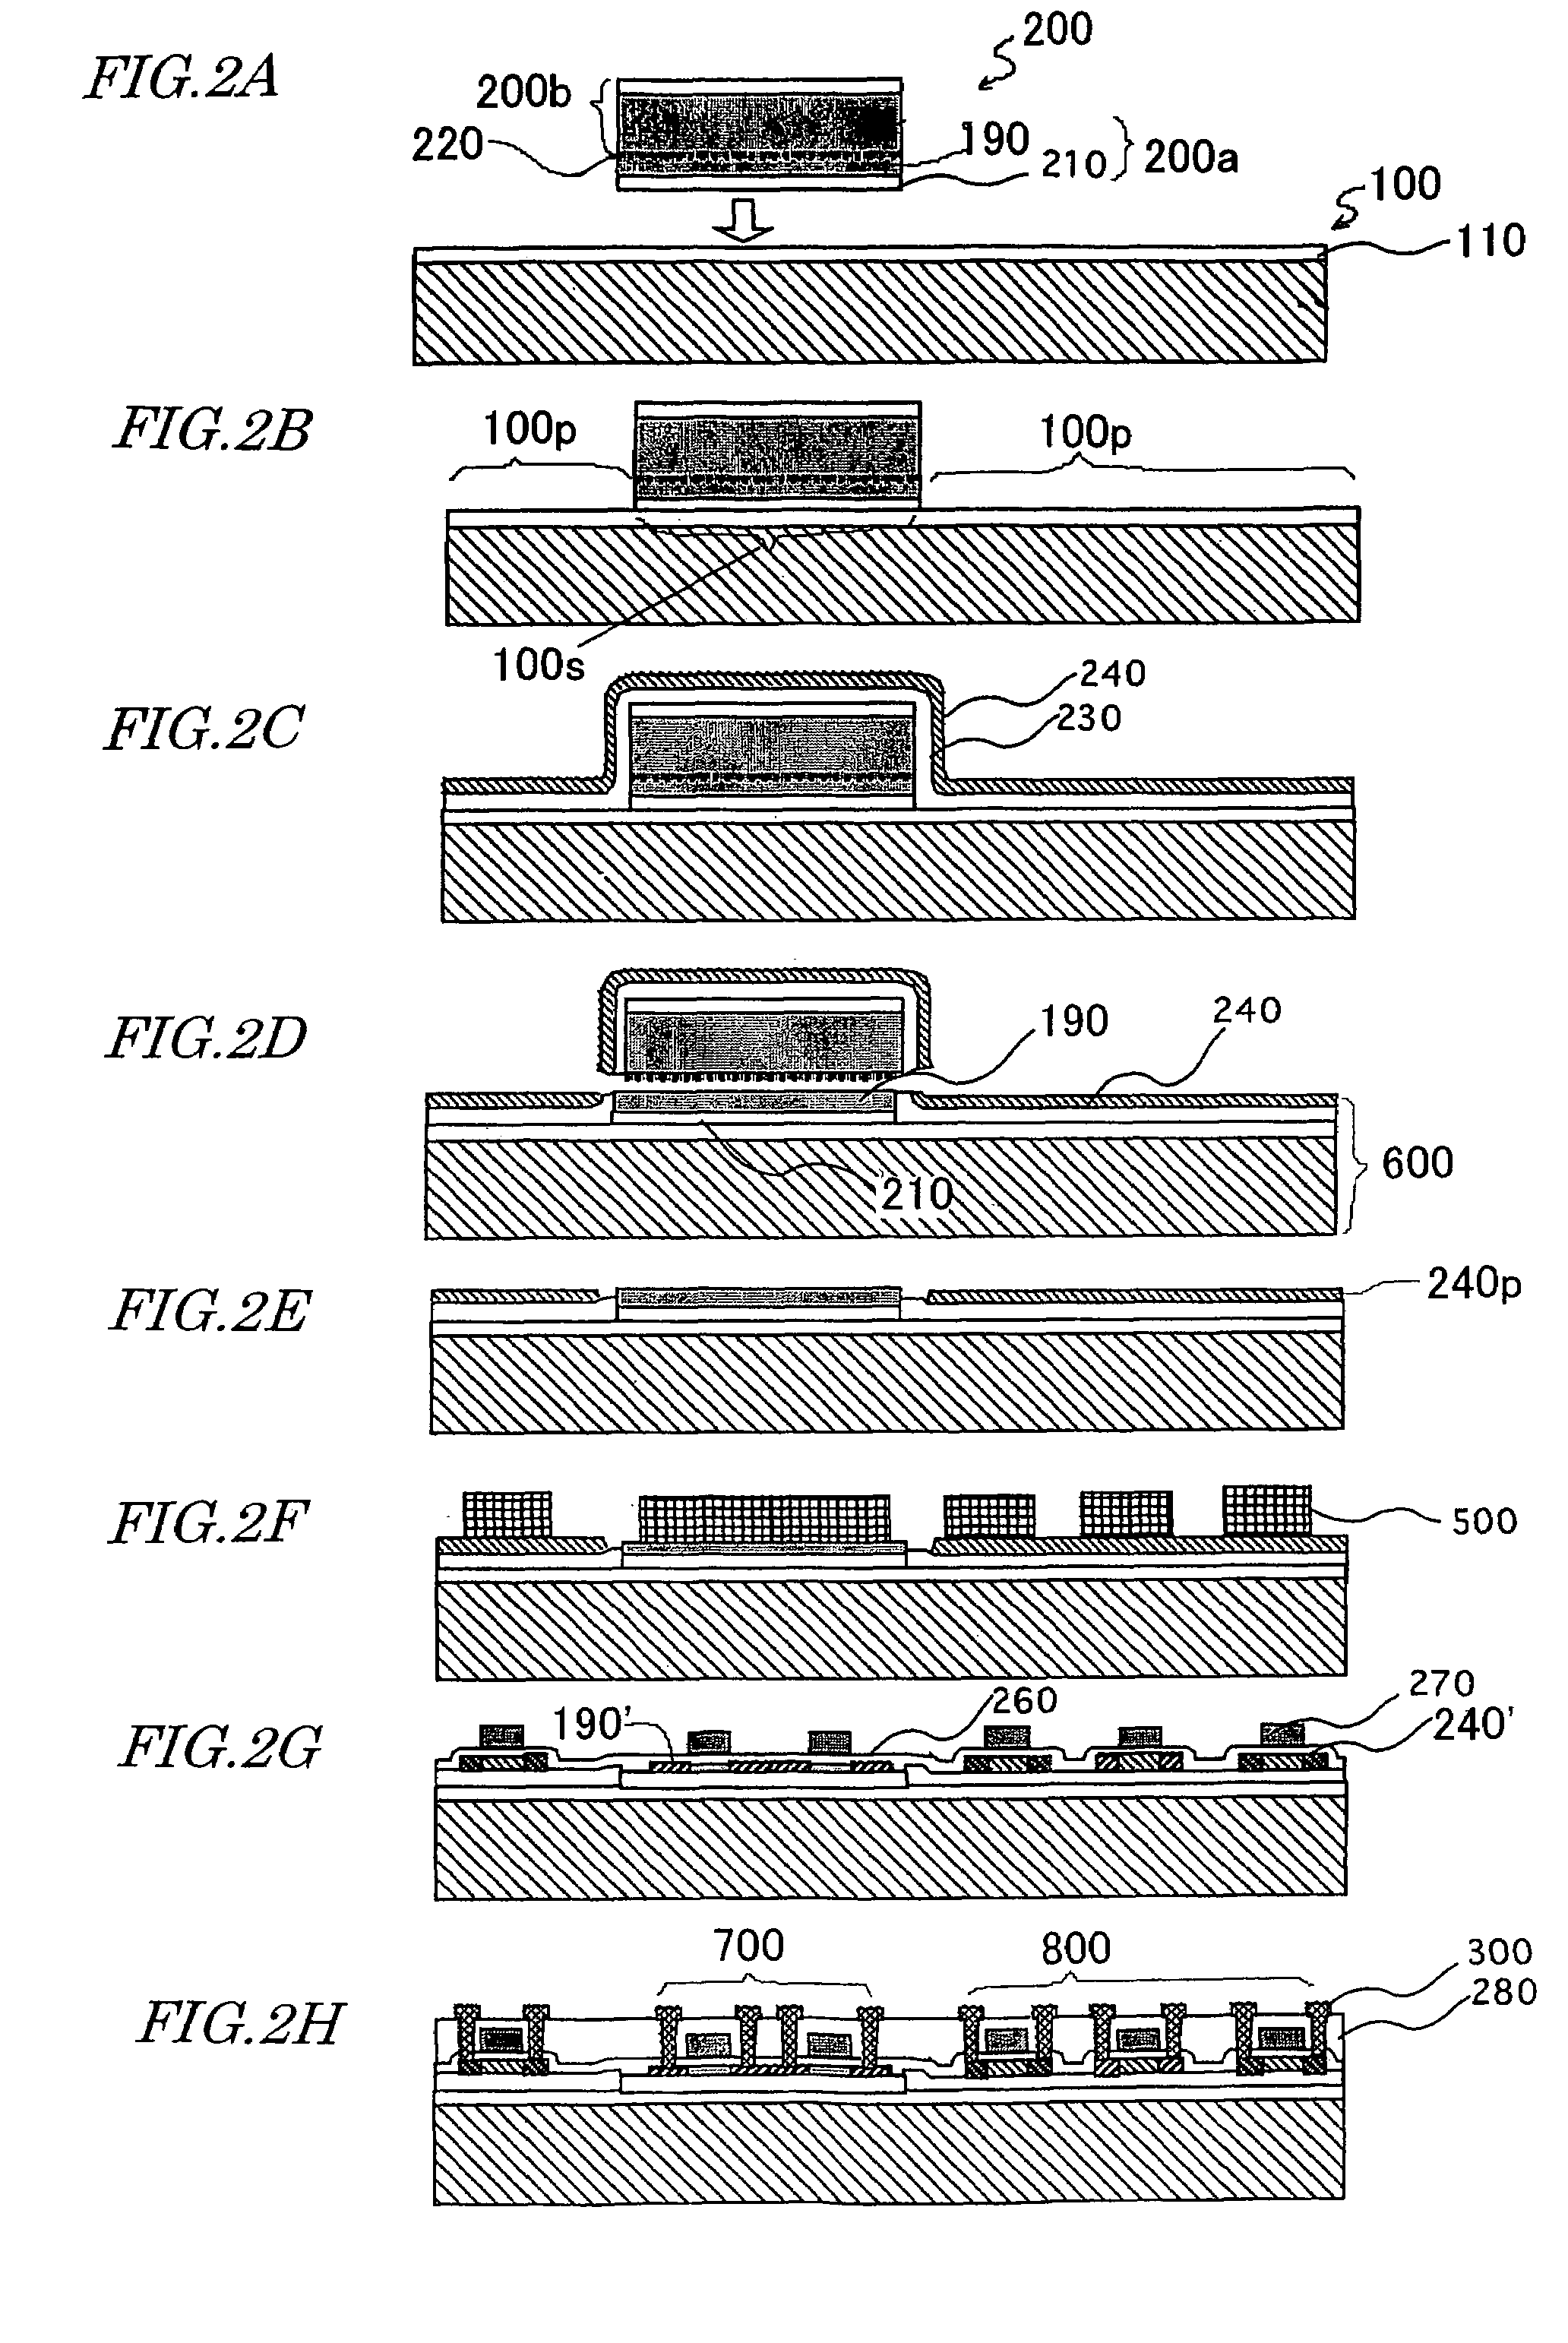 Semiconductor device with single crystal semiconductor layer(s) bonded to insulating surface of substrate